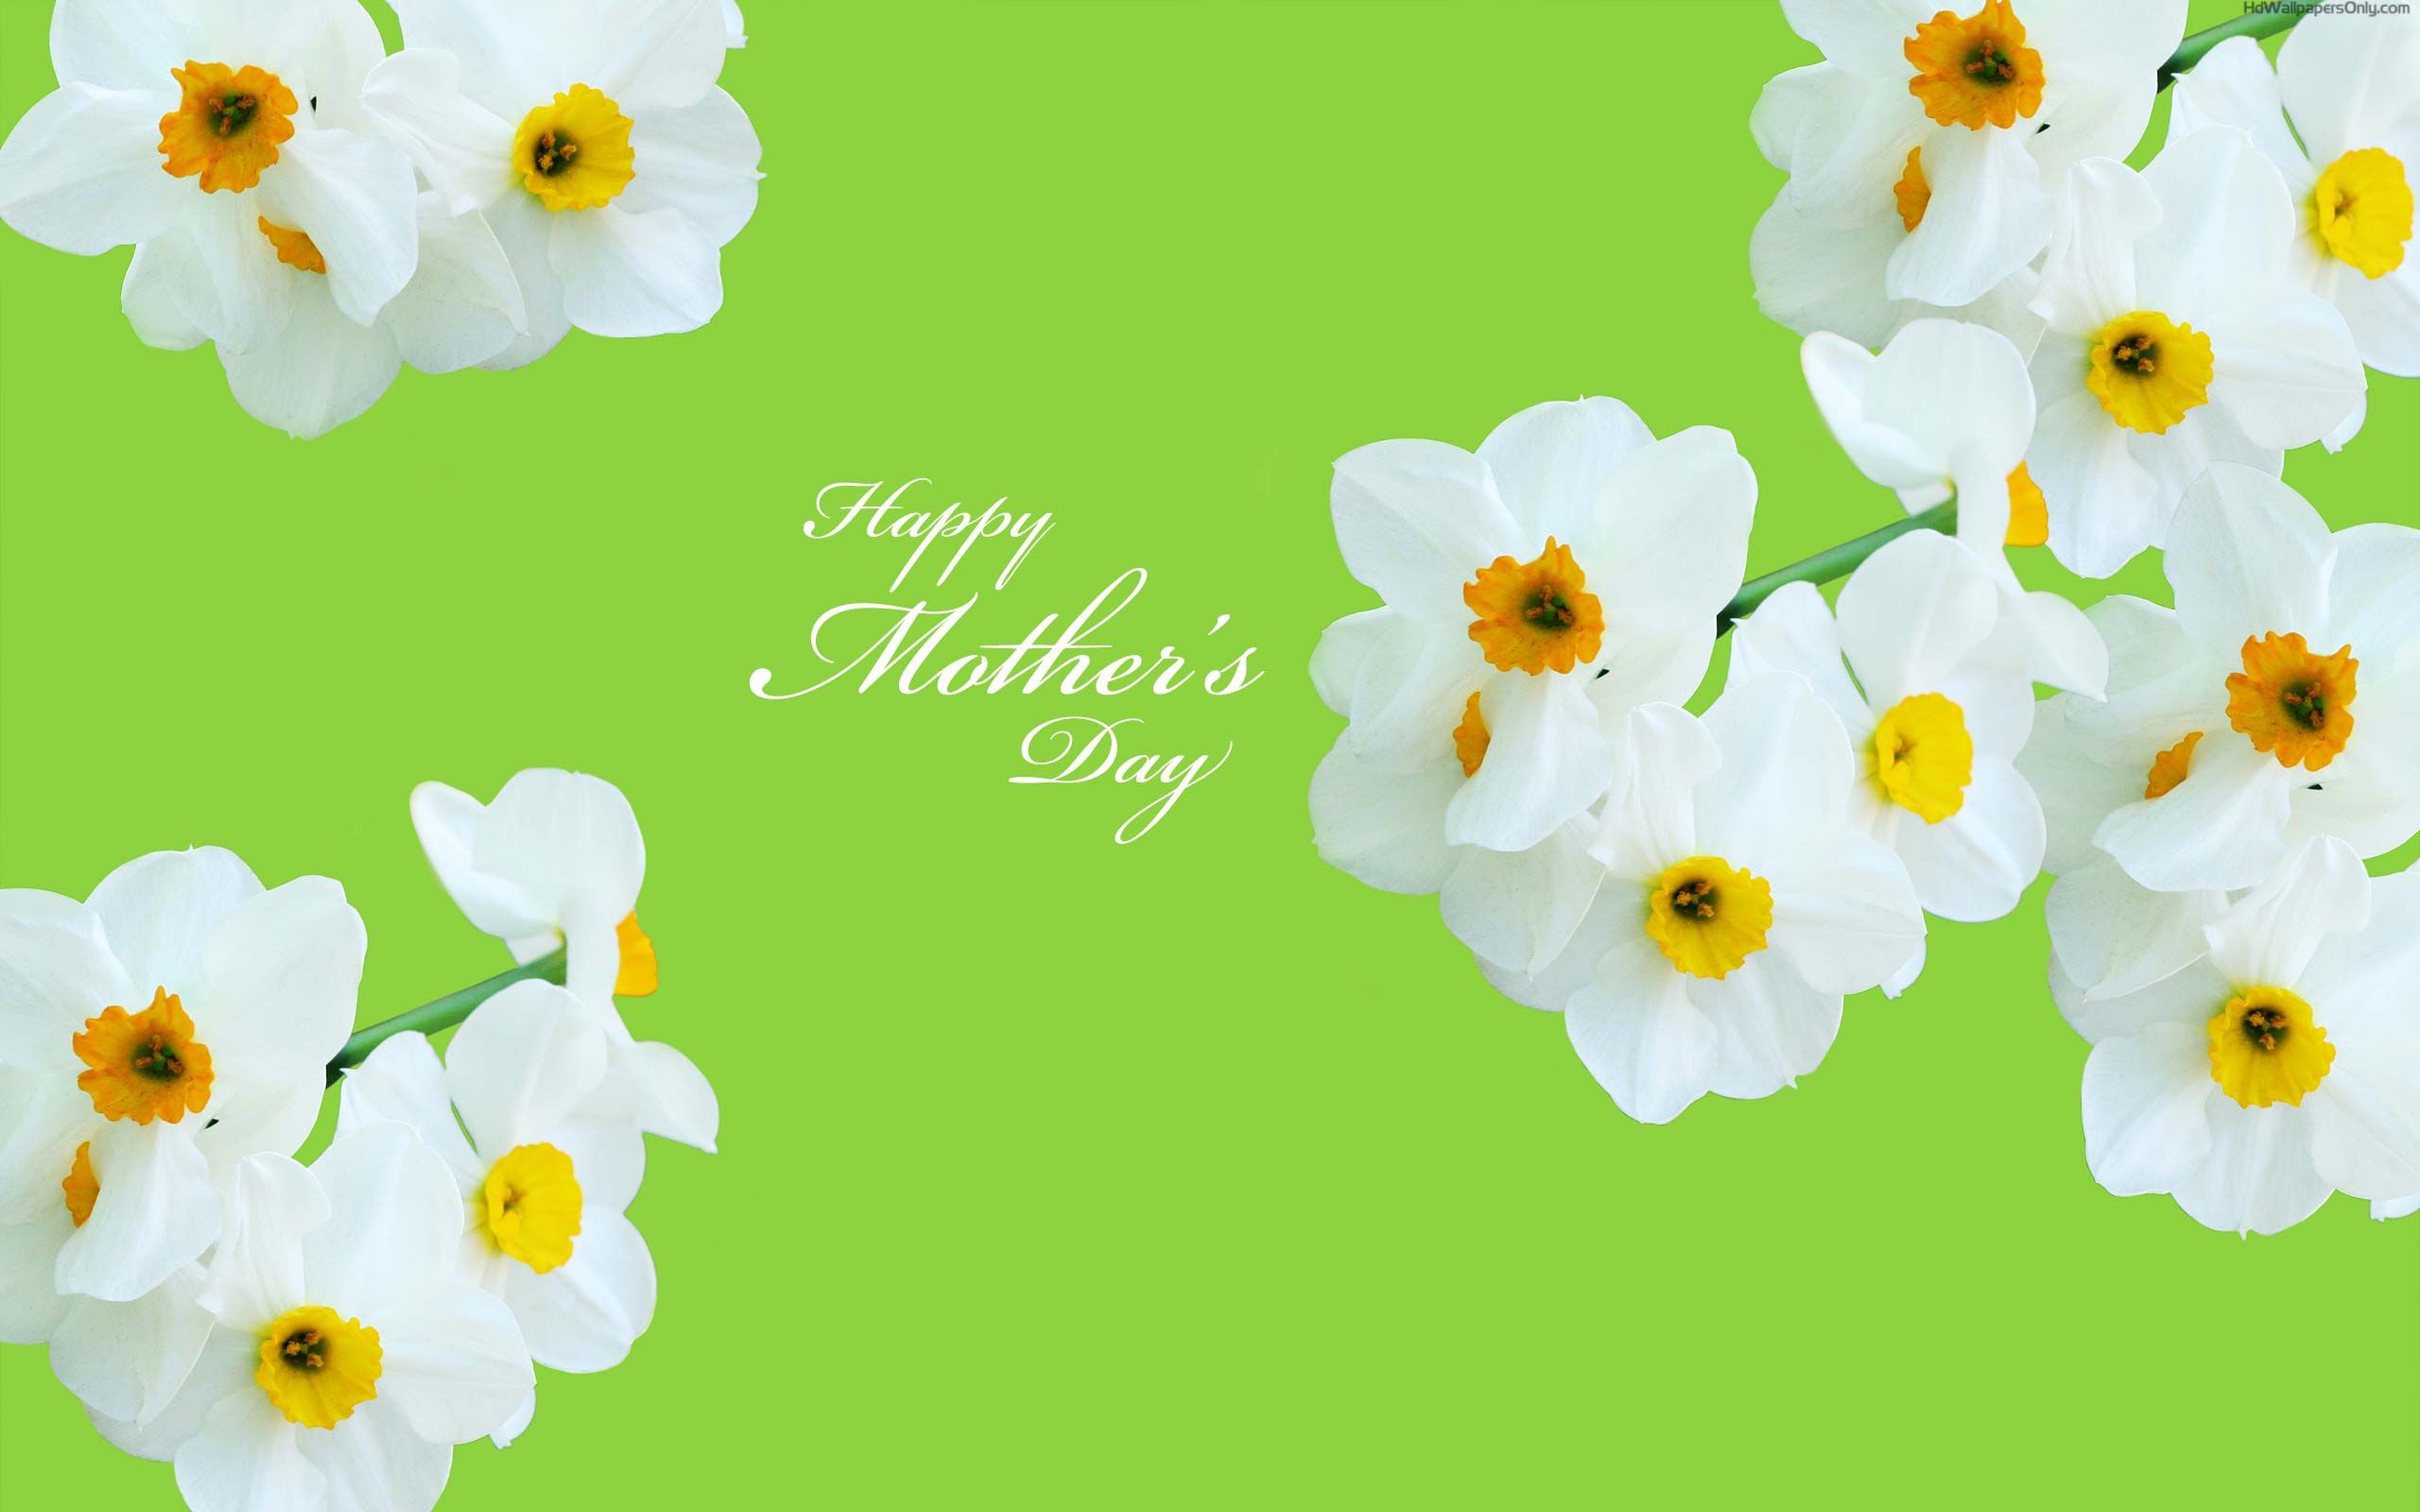 HD wallpaper, Mothers, Day, Happy